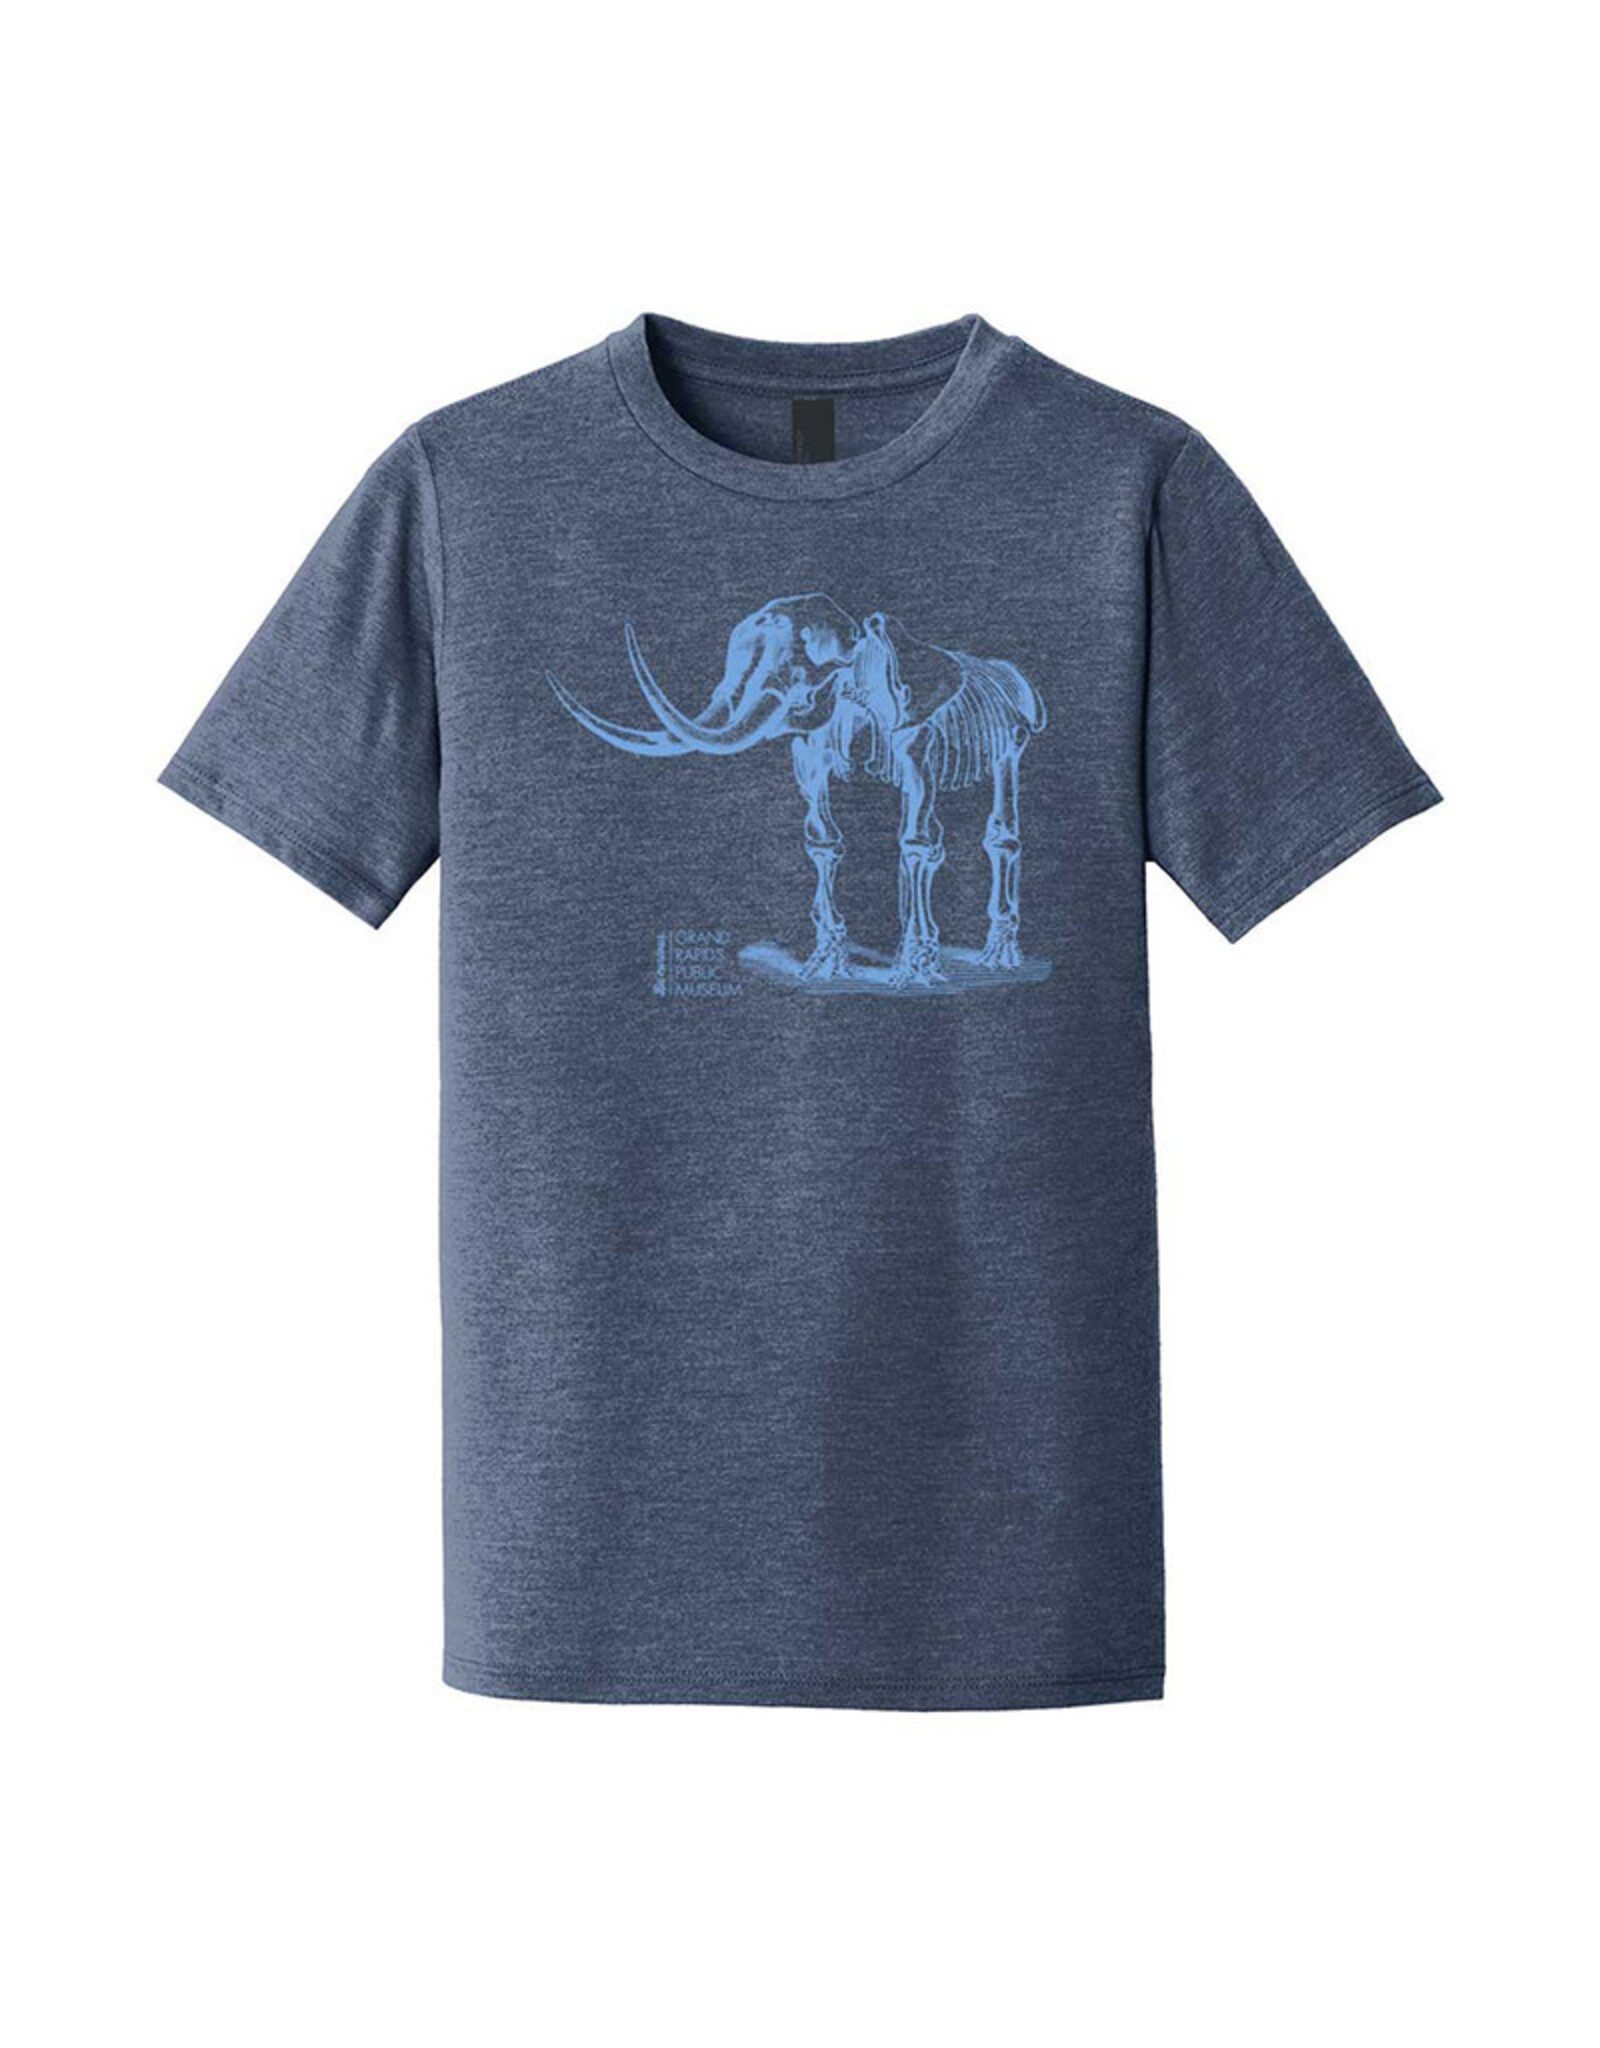 GRPM Mastodon Youth District Navy Frost Tee